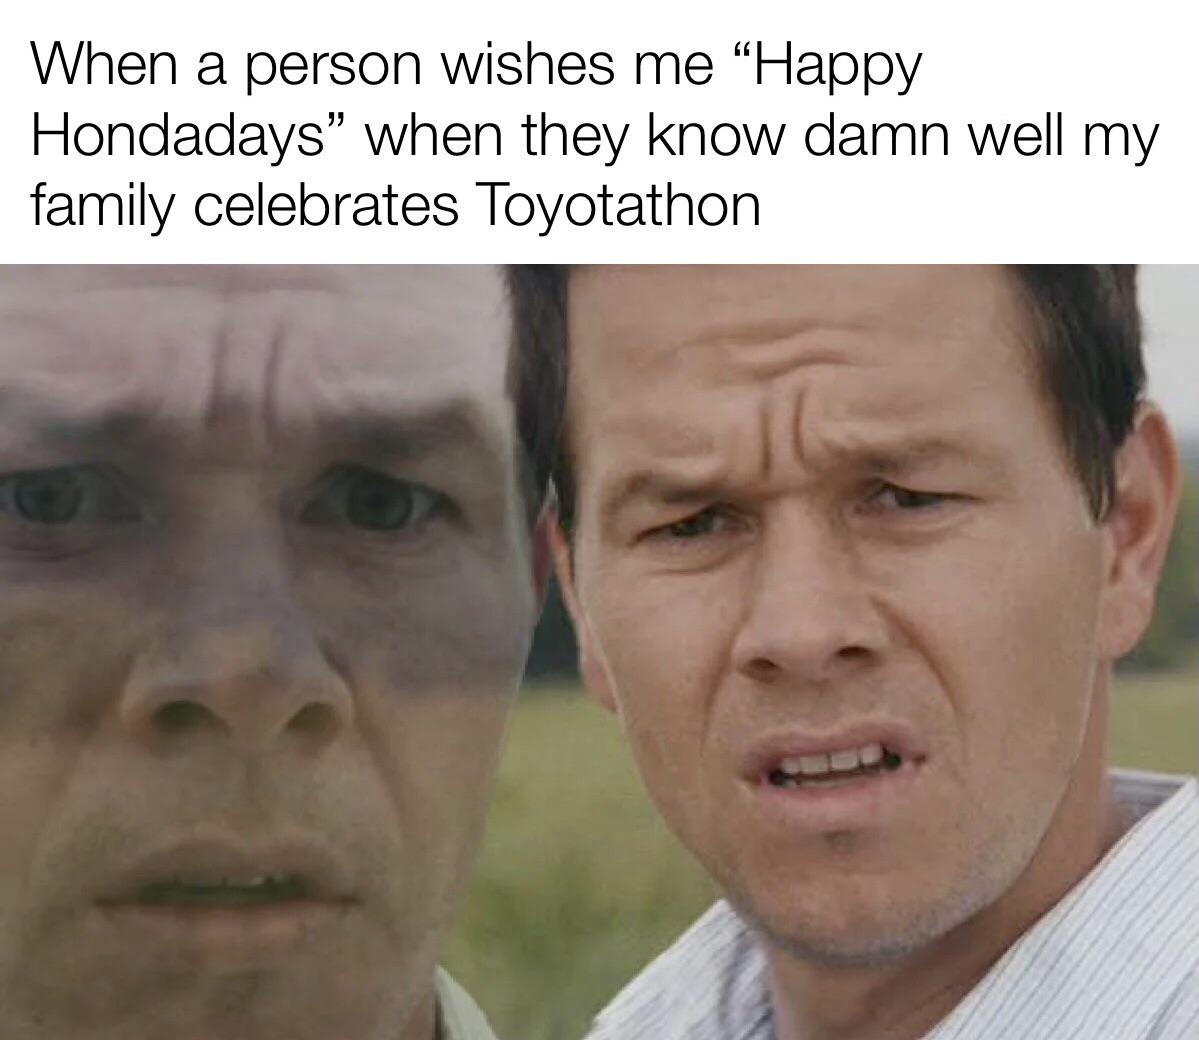 fresh memes - disappointed meme - When a person wishes me "Happy Hondadays" when they know damn well my family celebrates Toyotathon